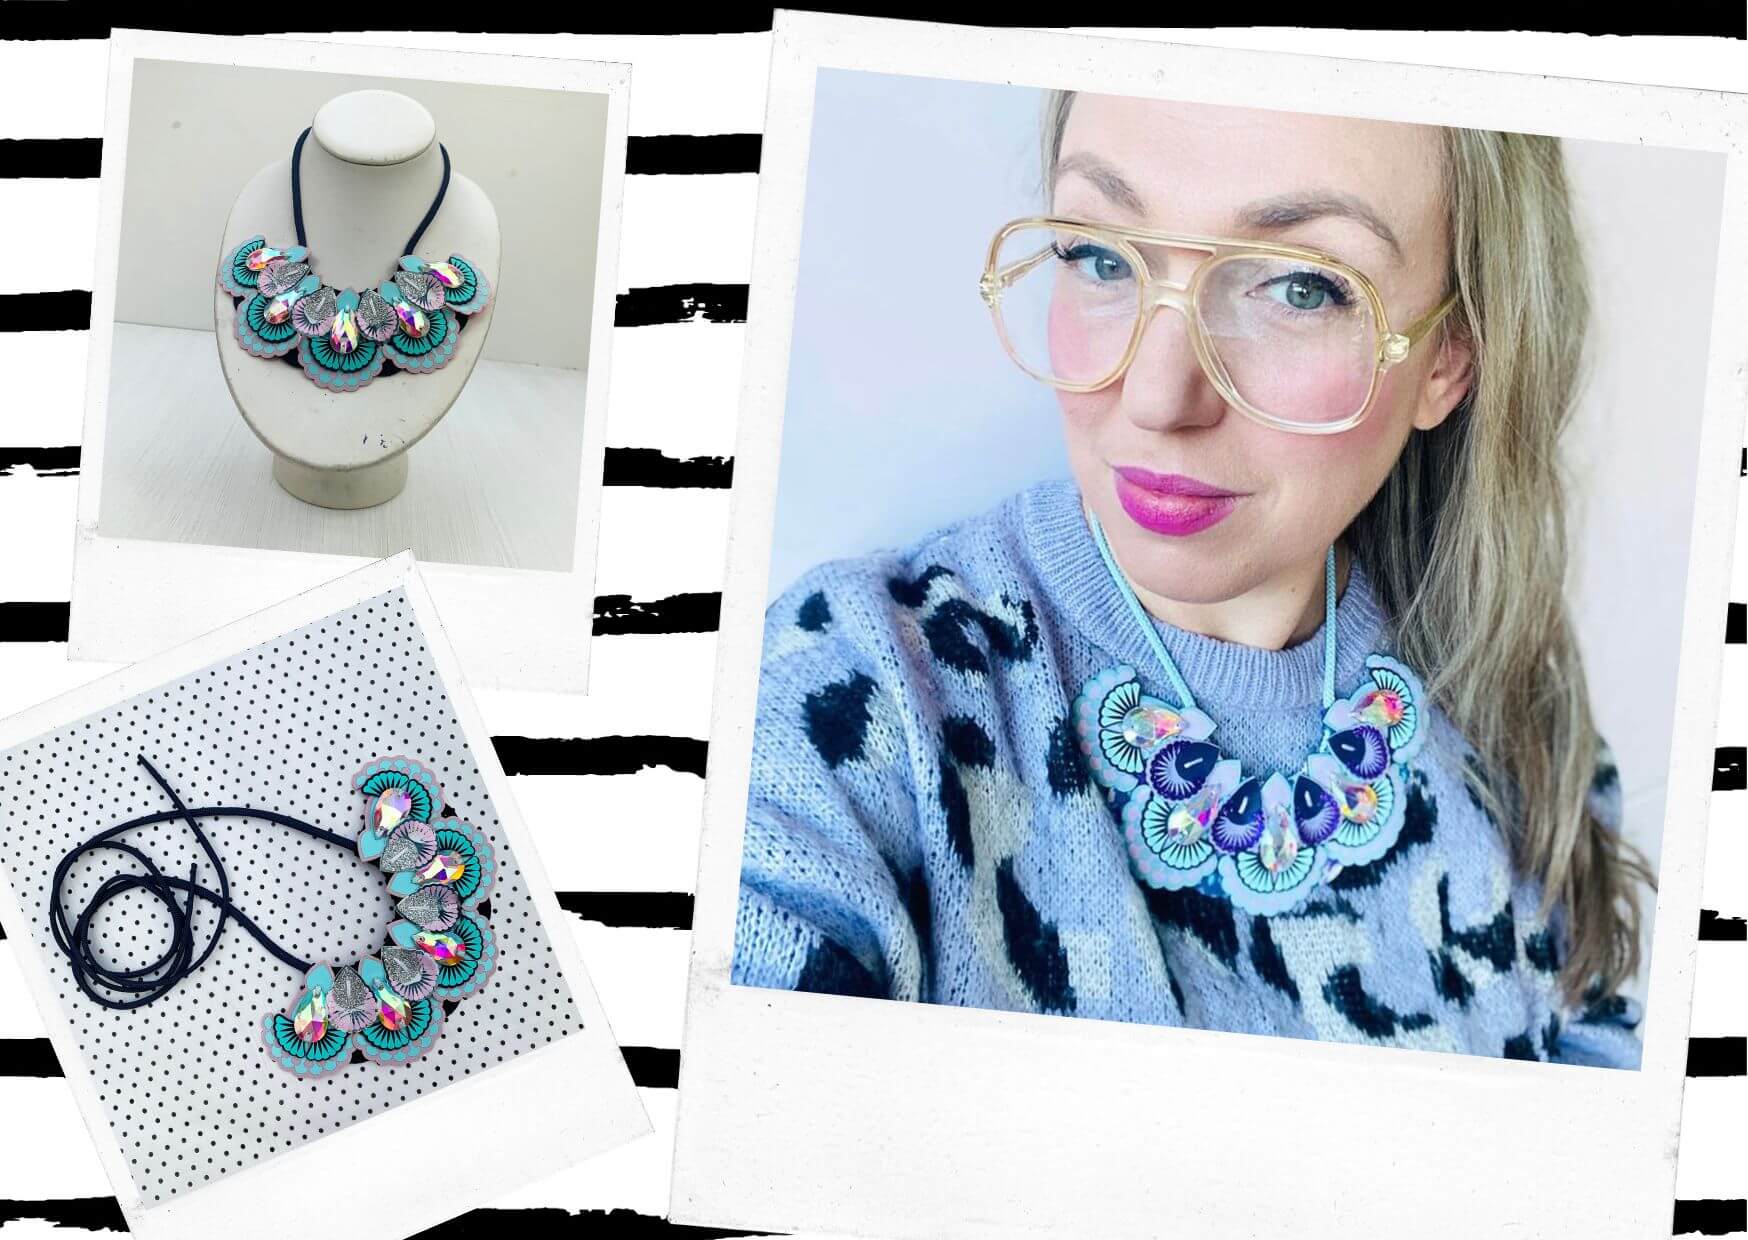 Three polaroids are scattered at jaunty angles on a white background with black hand drawn looking stripes. All three images are of a lilac and light blue statement bib necklace with iridescent jewels. In one image the necklace is being worn by a woman wearing a lilac animal print sweater.